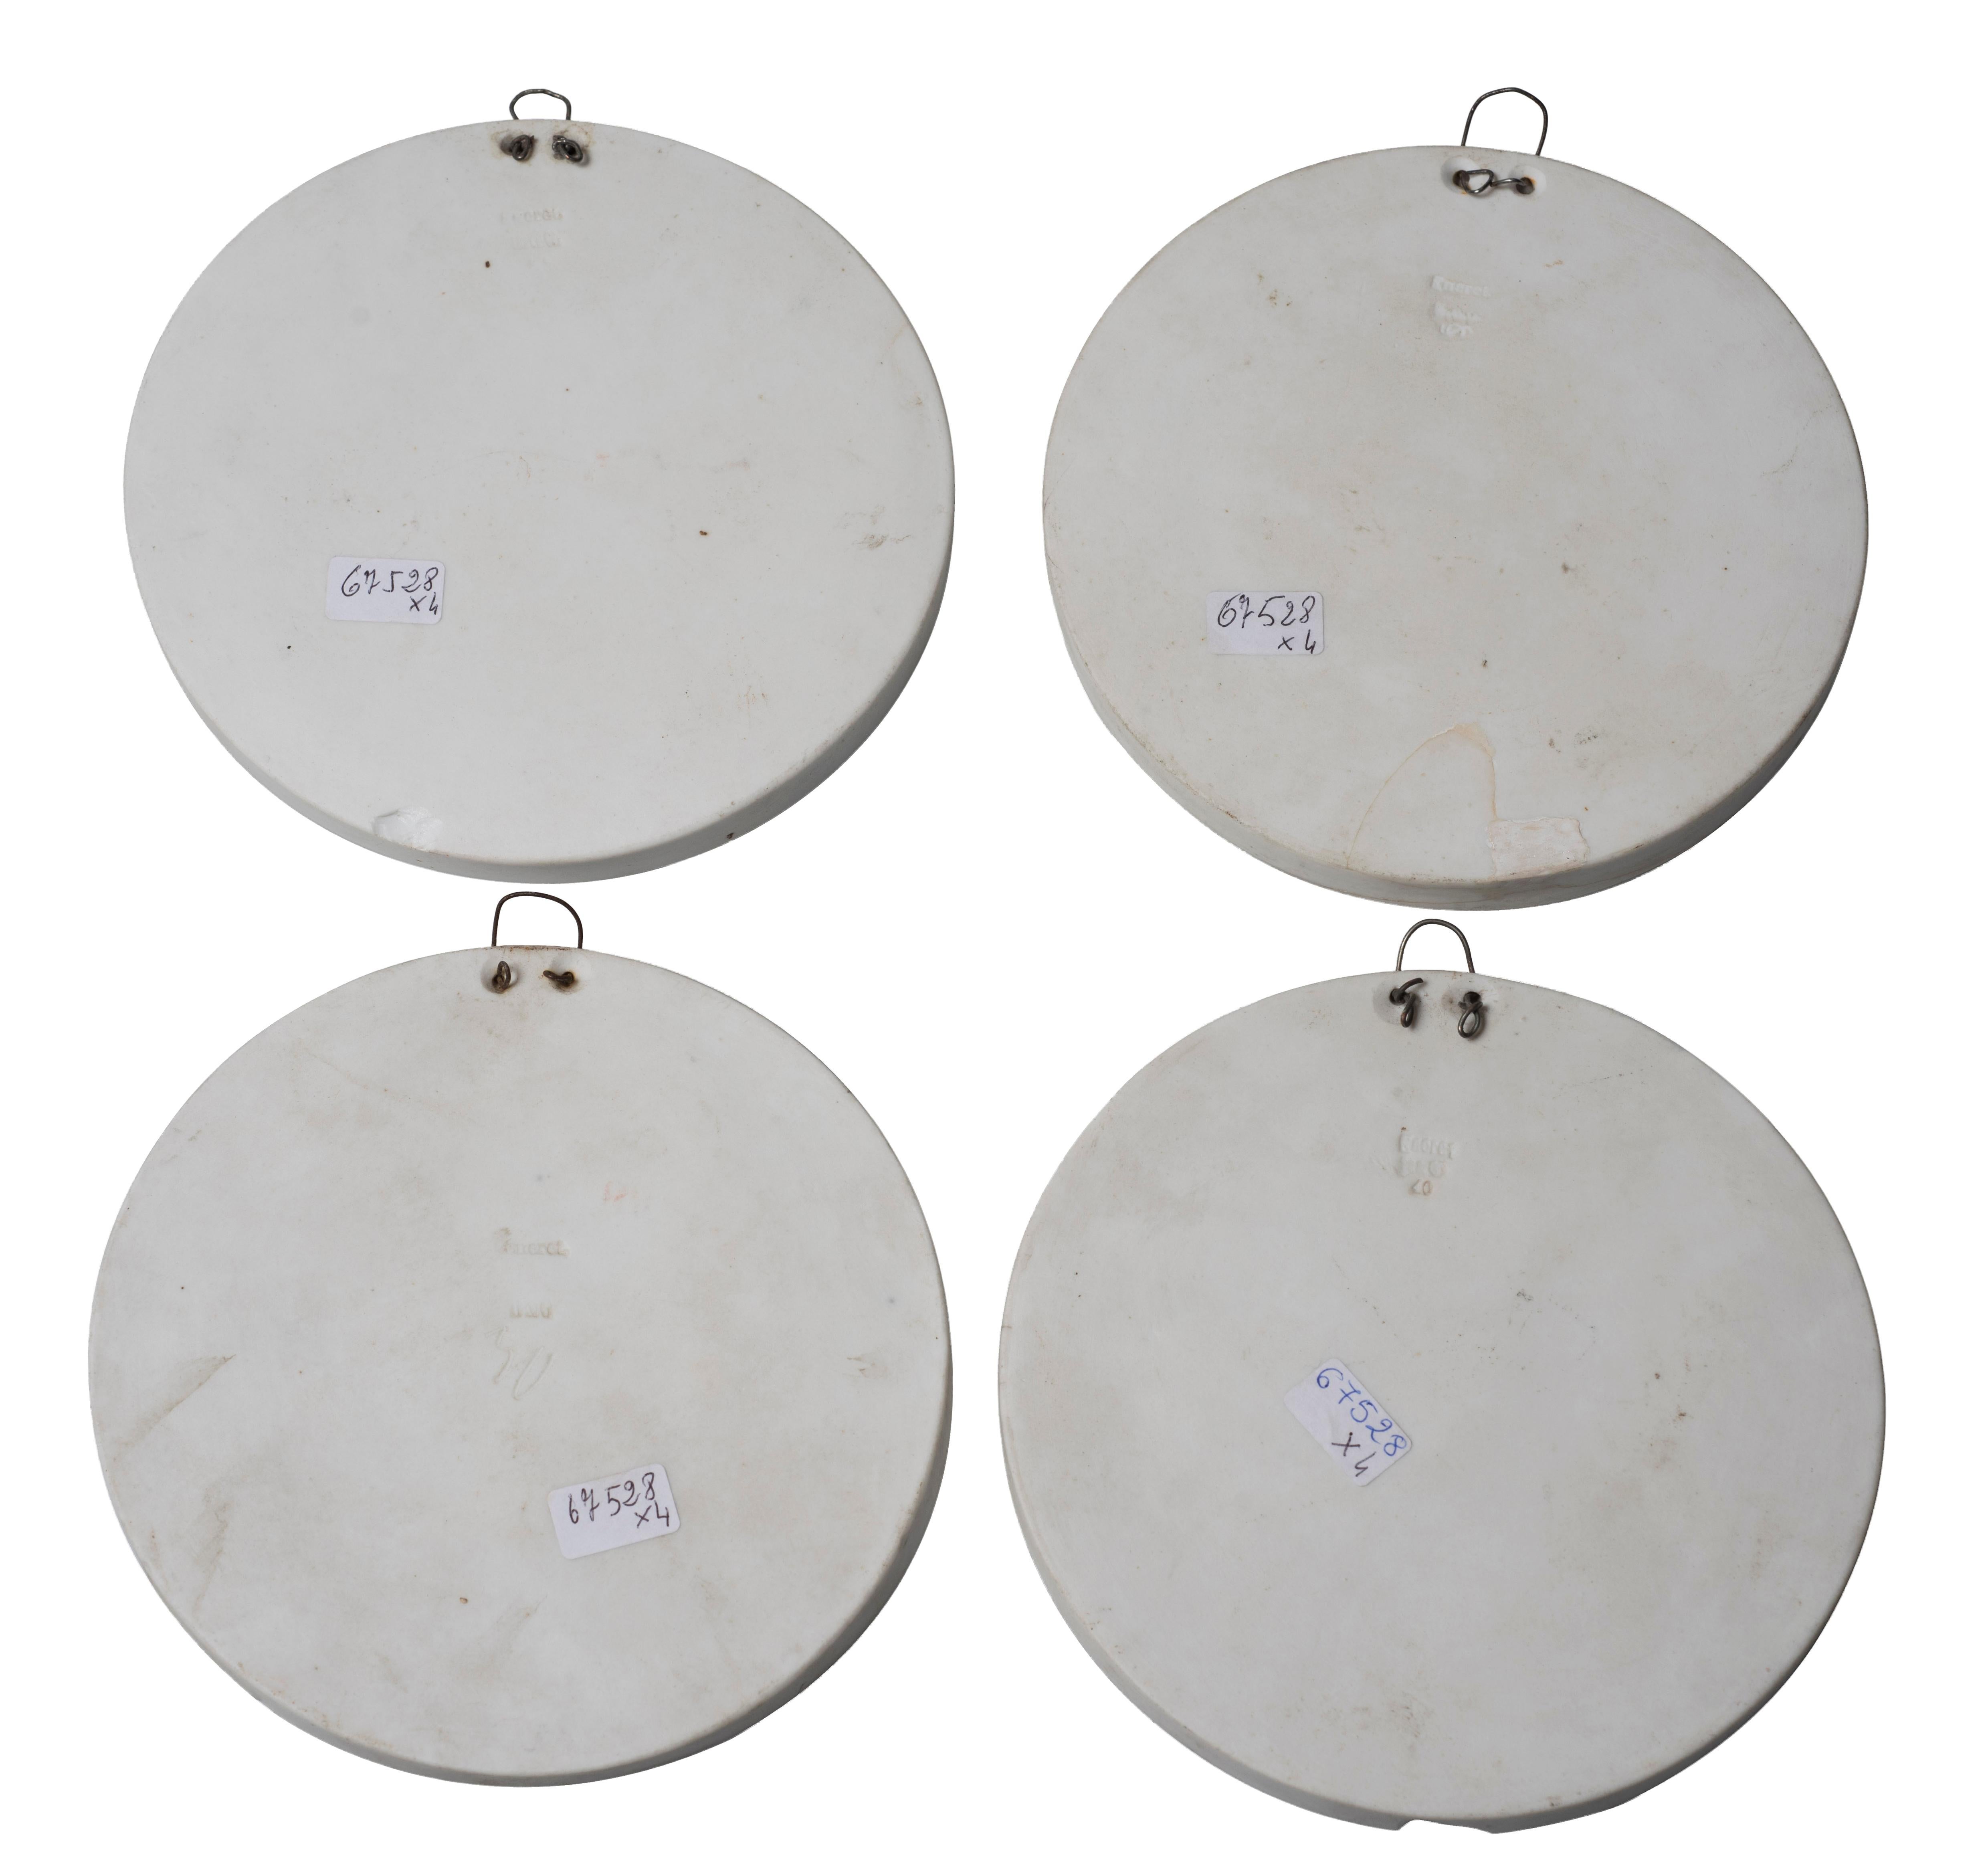 Neoclassical Medals are beautiful decorative objects.

Four circular plates in the precious biscuit porcelain with mythological subjects, and an evident Neoclassical taste. Realized in France in 19th century.

In very good conditions, except for